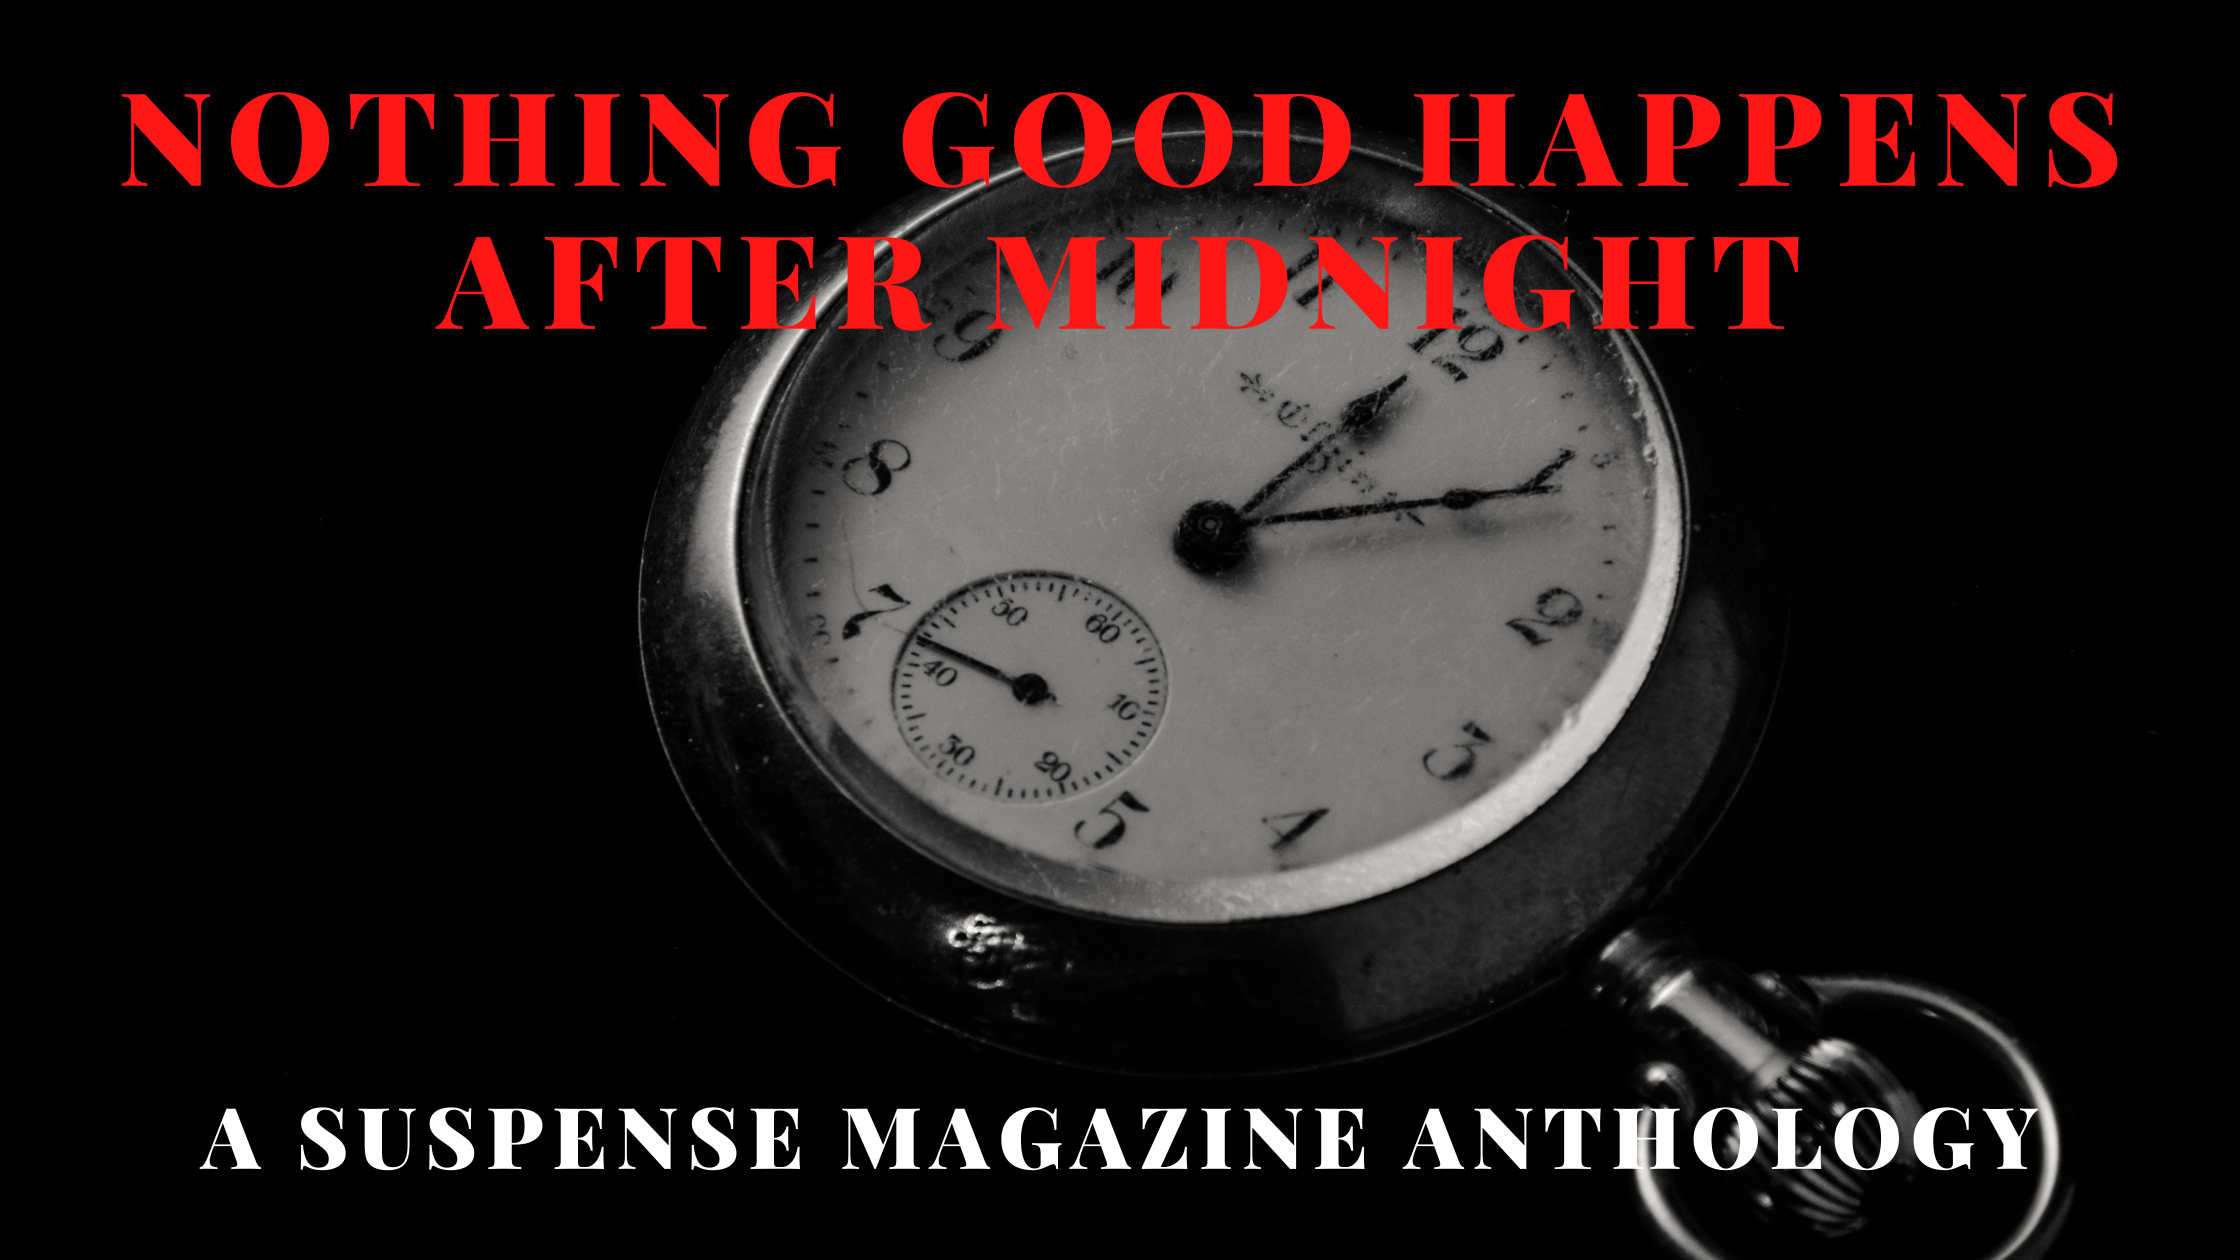 Book Review: Nothing Good Happens After Midnight: A Suspense Magazine Anthology